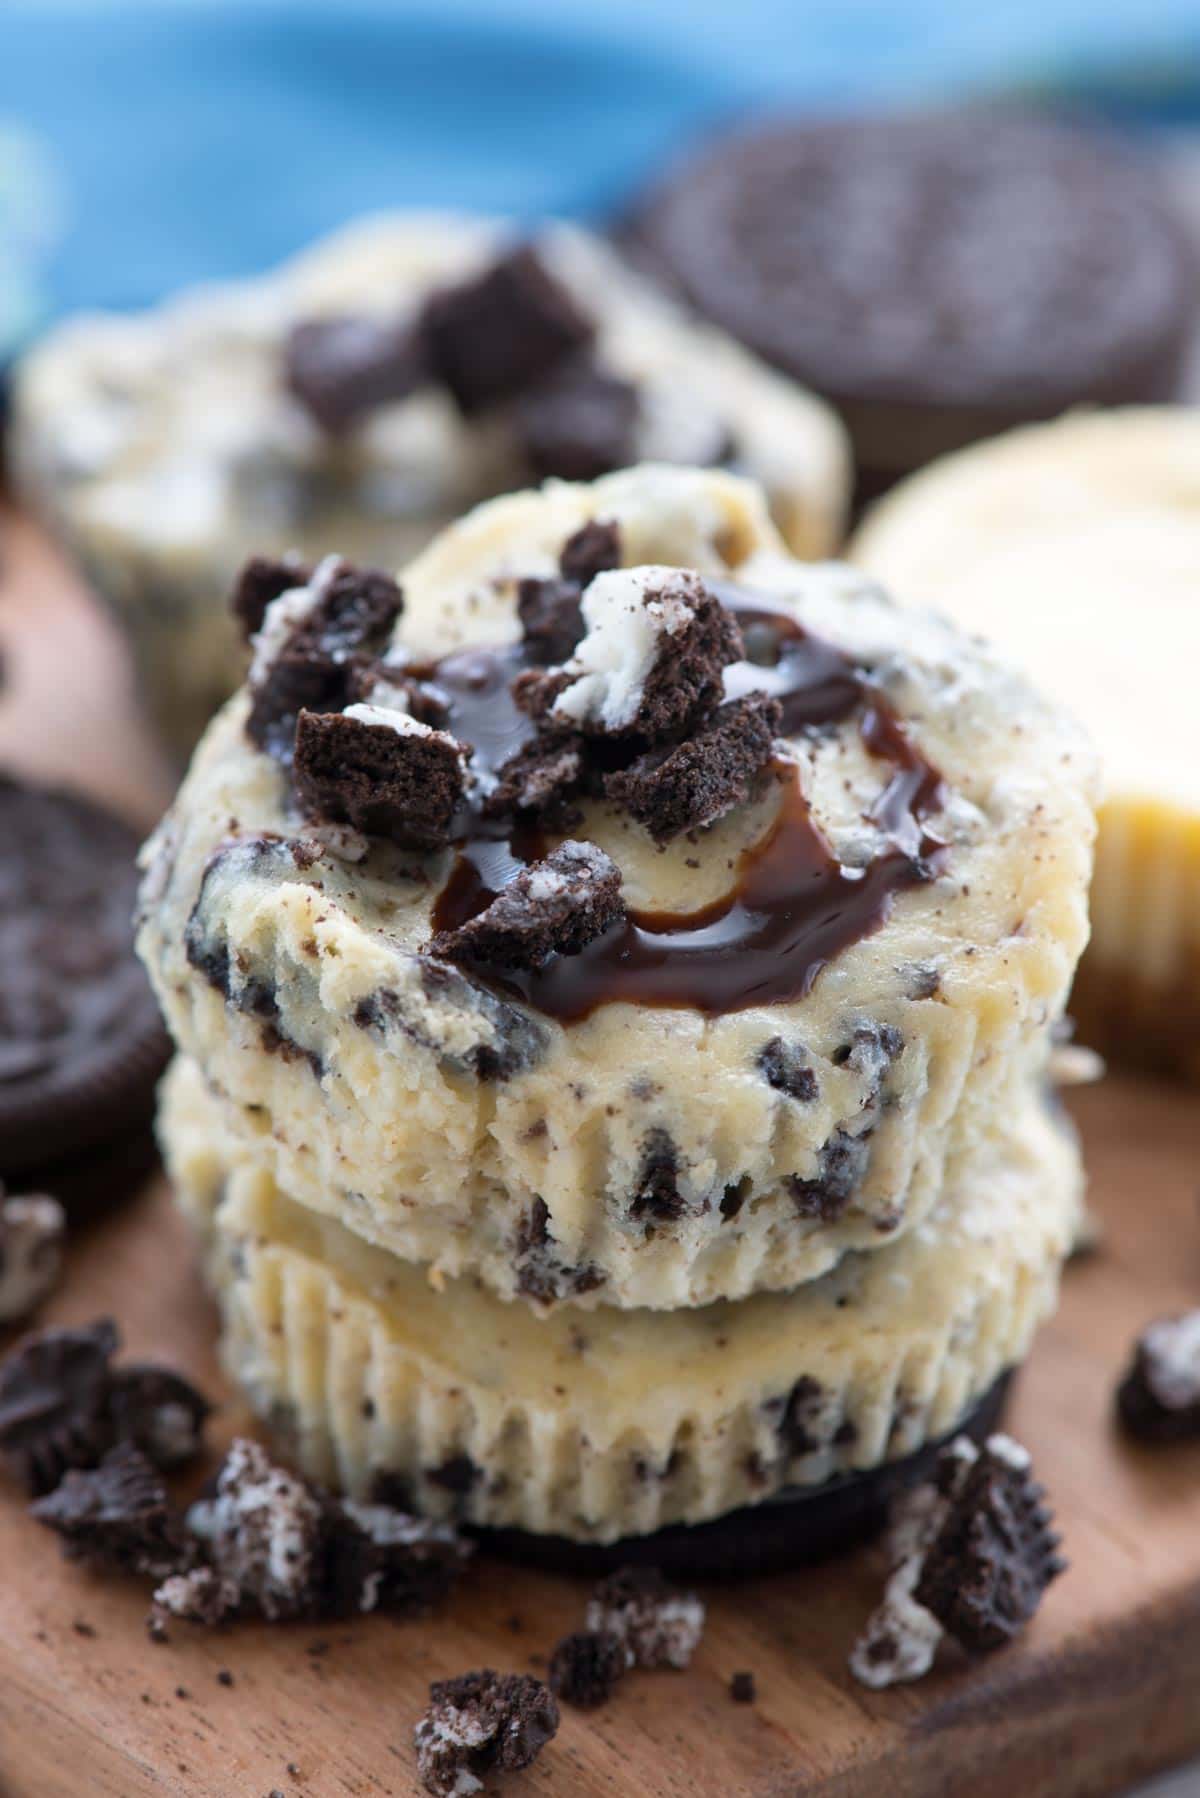 Easy Oreo Cheesecakes - this simple cheesecake recipe makes 12 perfect Cookies 'n Cream Cheesecakes with an Oreo Crust!